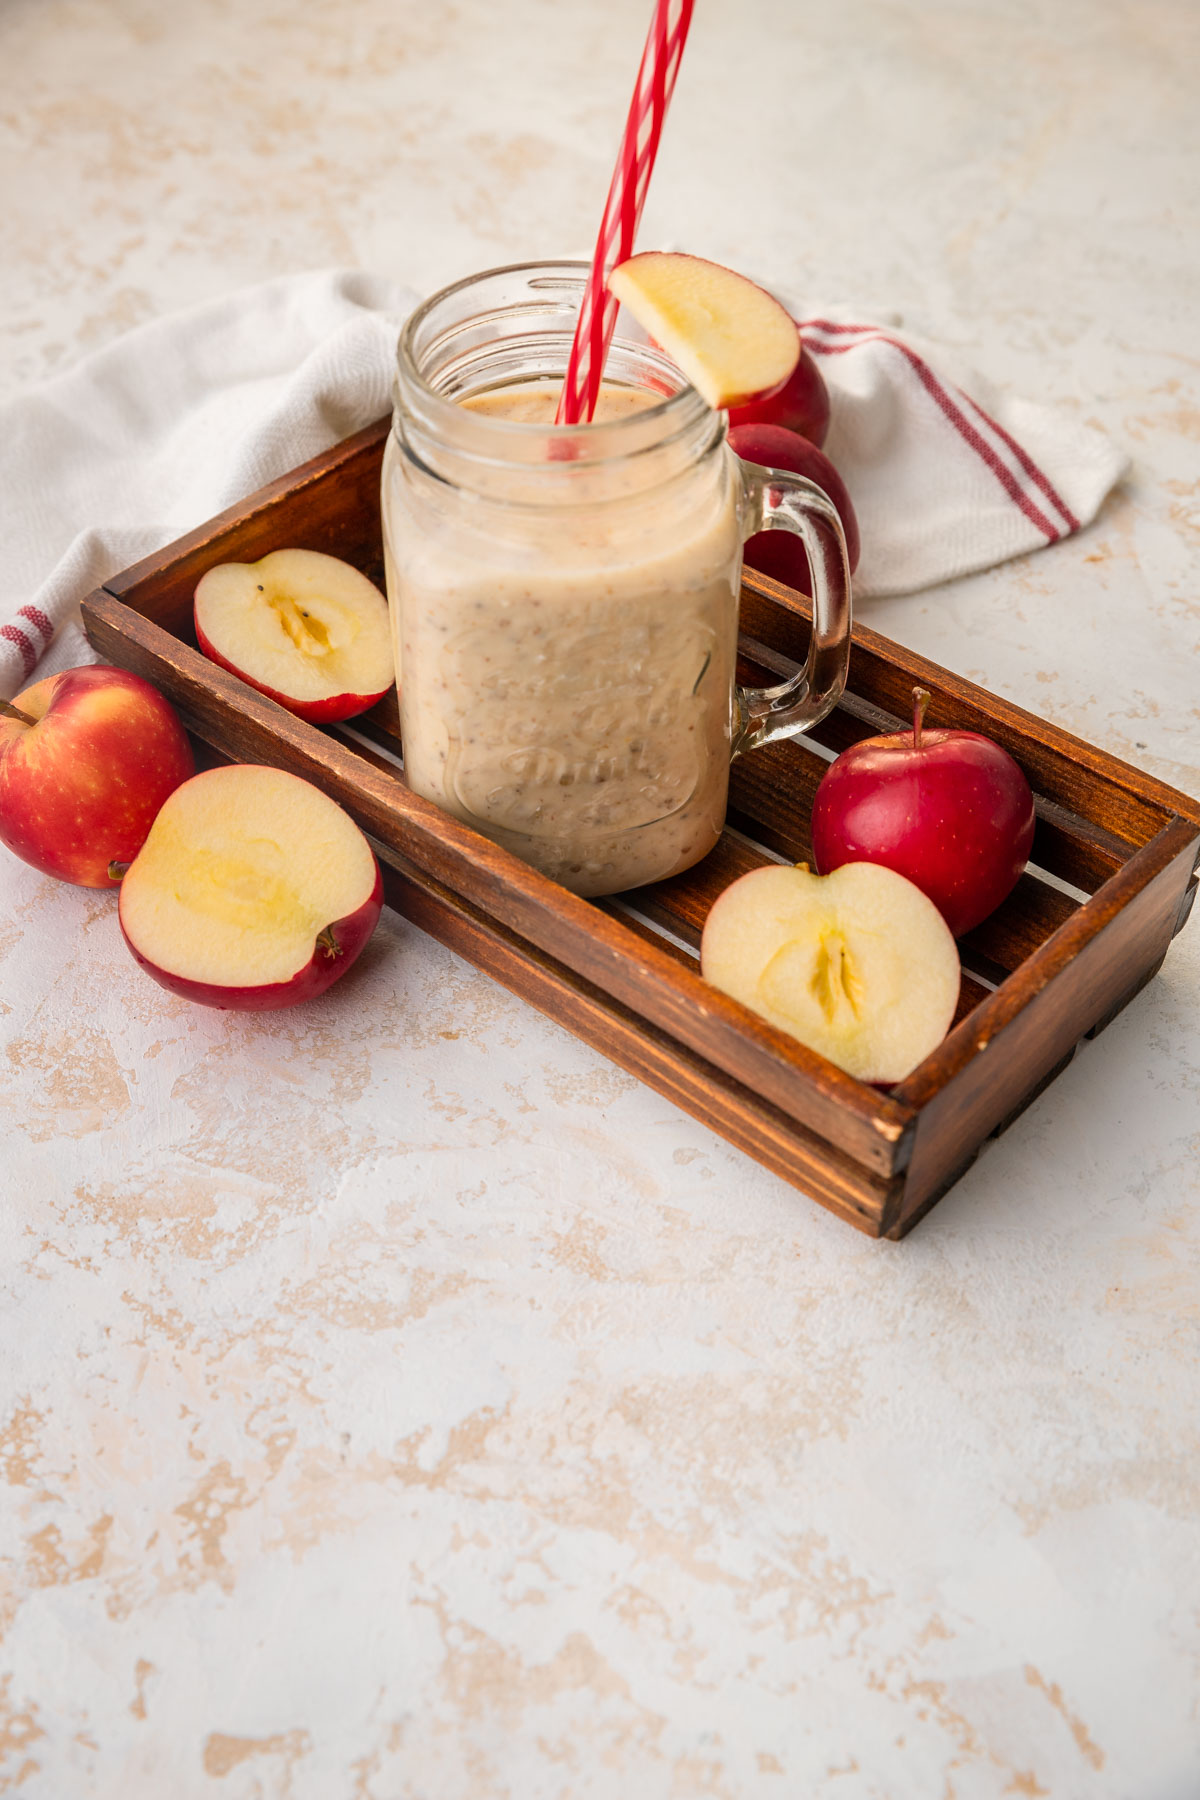 apple date smoothie with cut up apples scattered around.